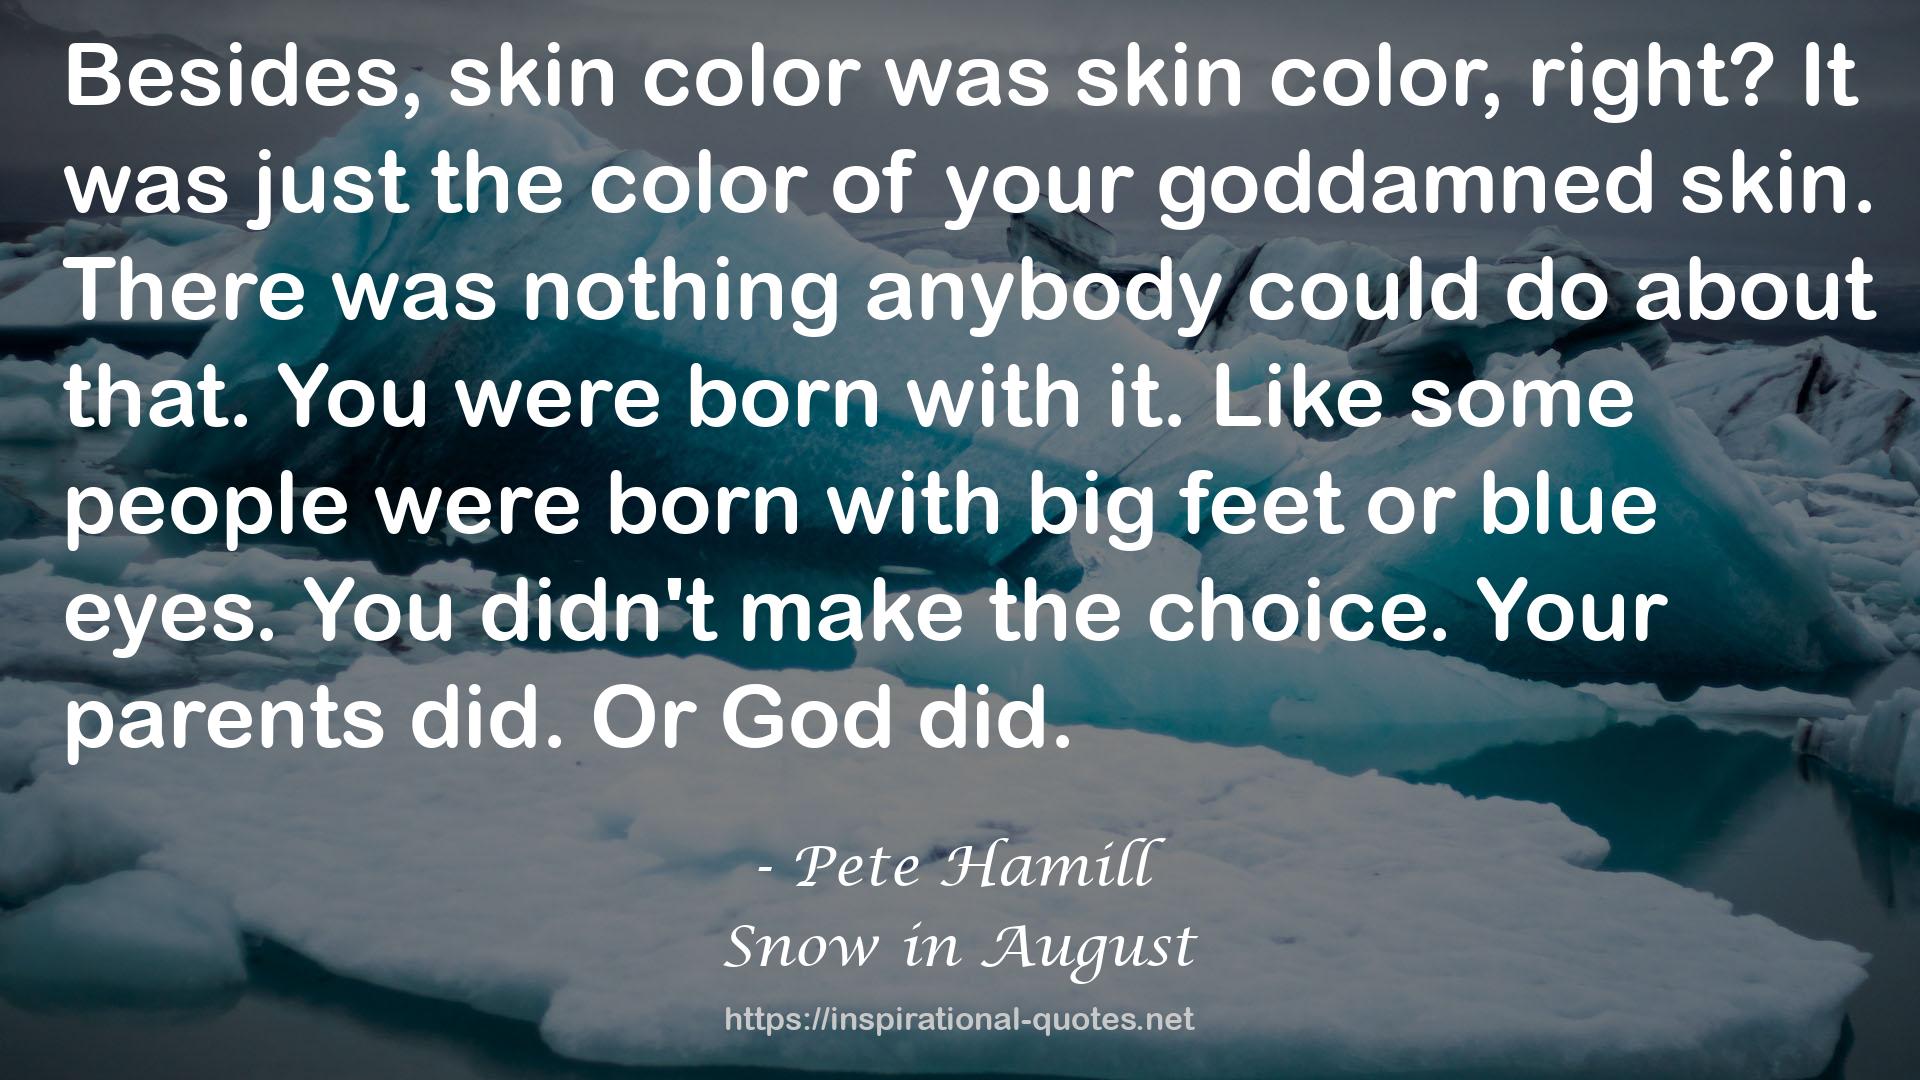 Snow in August QUOTES